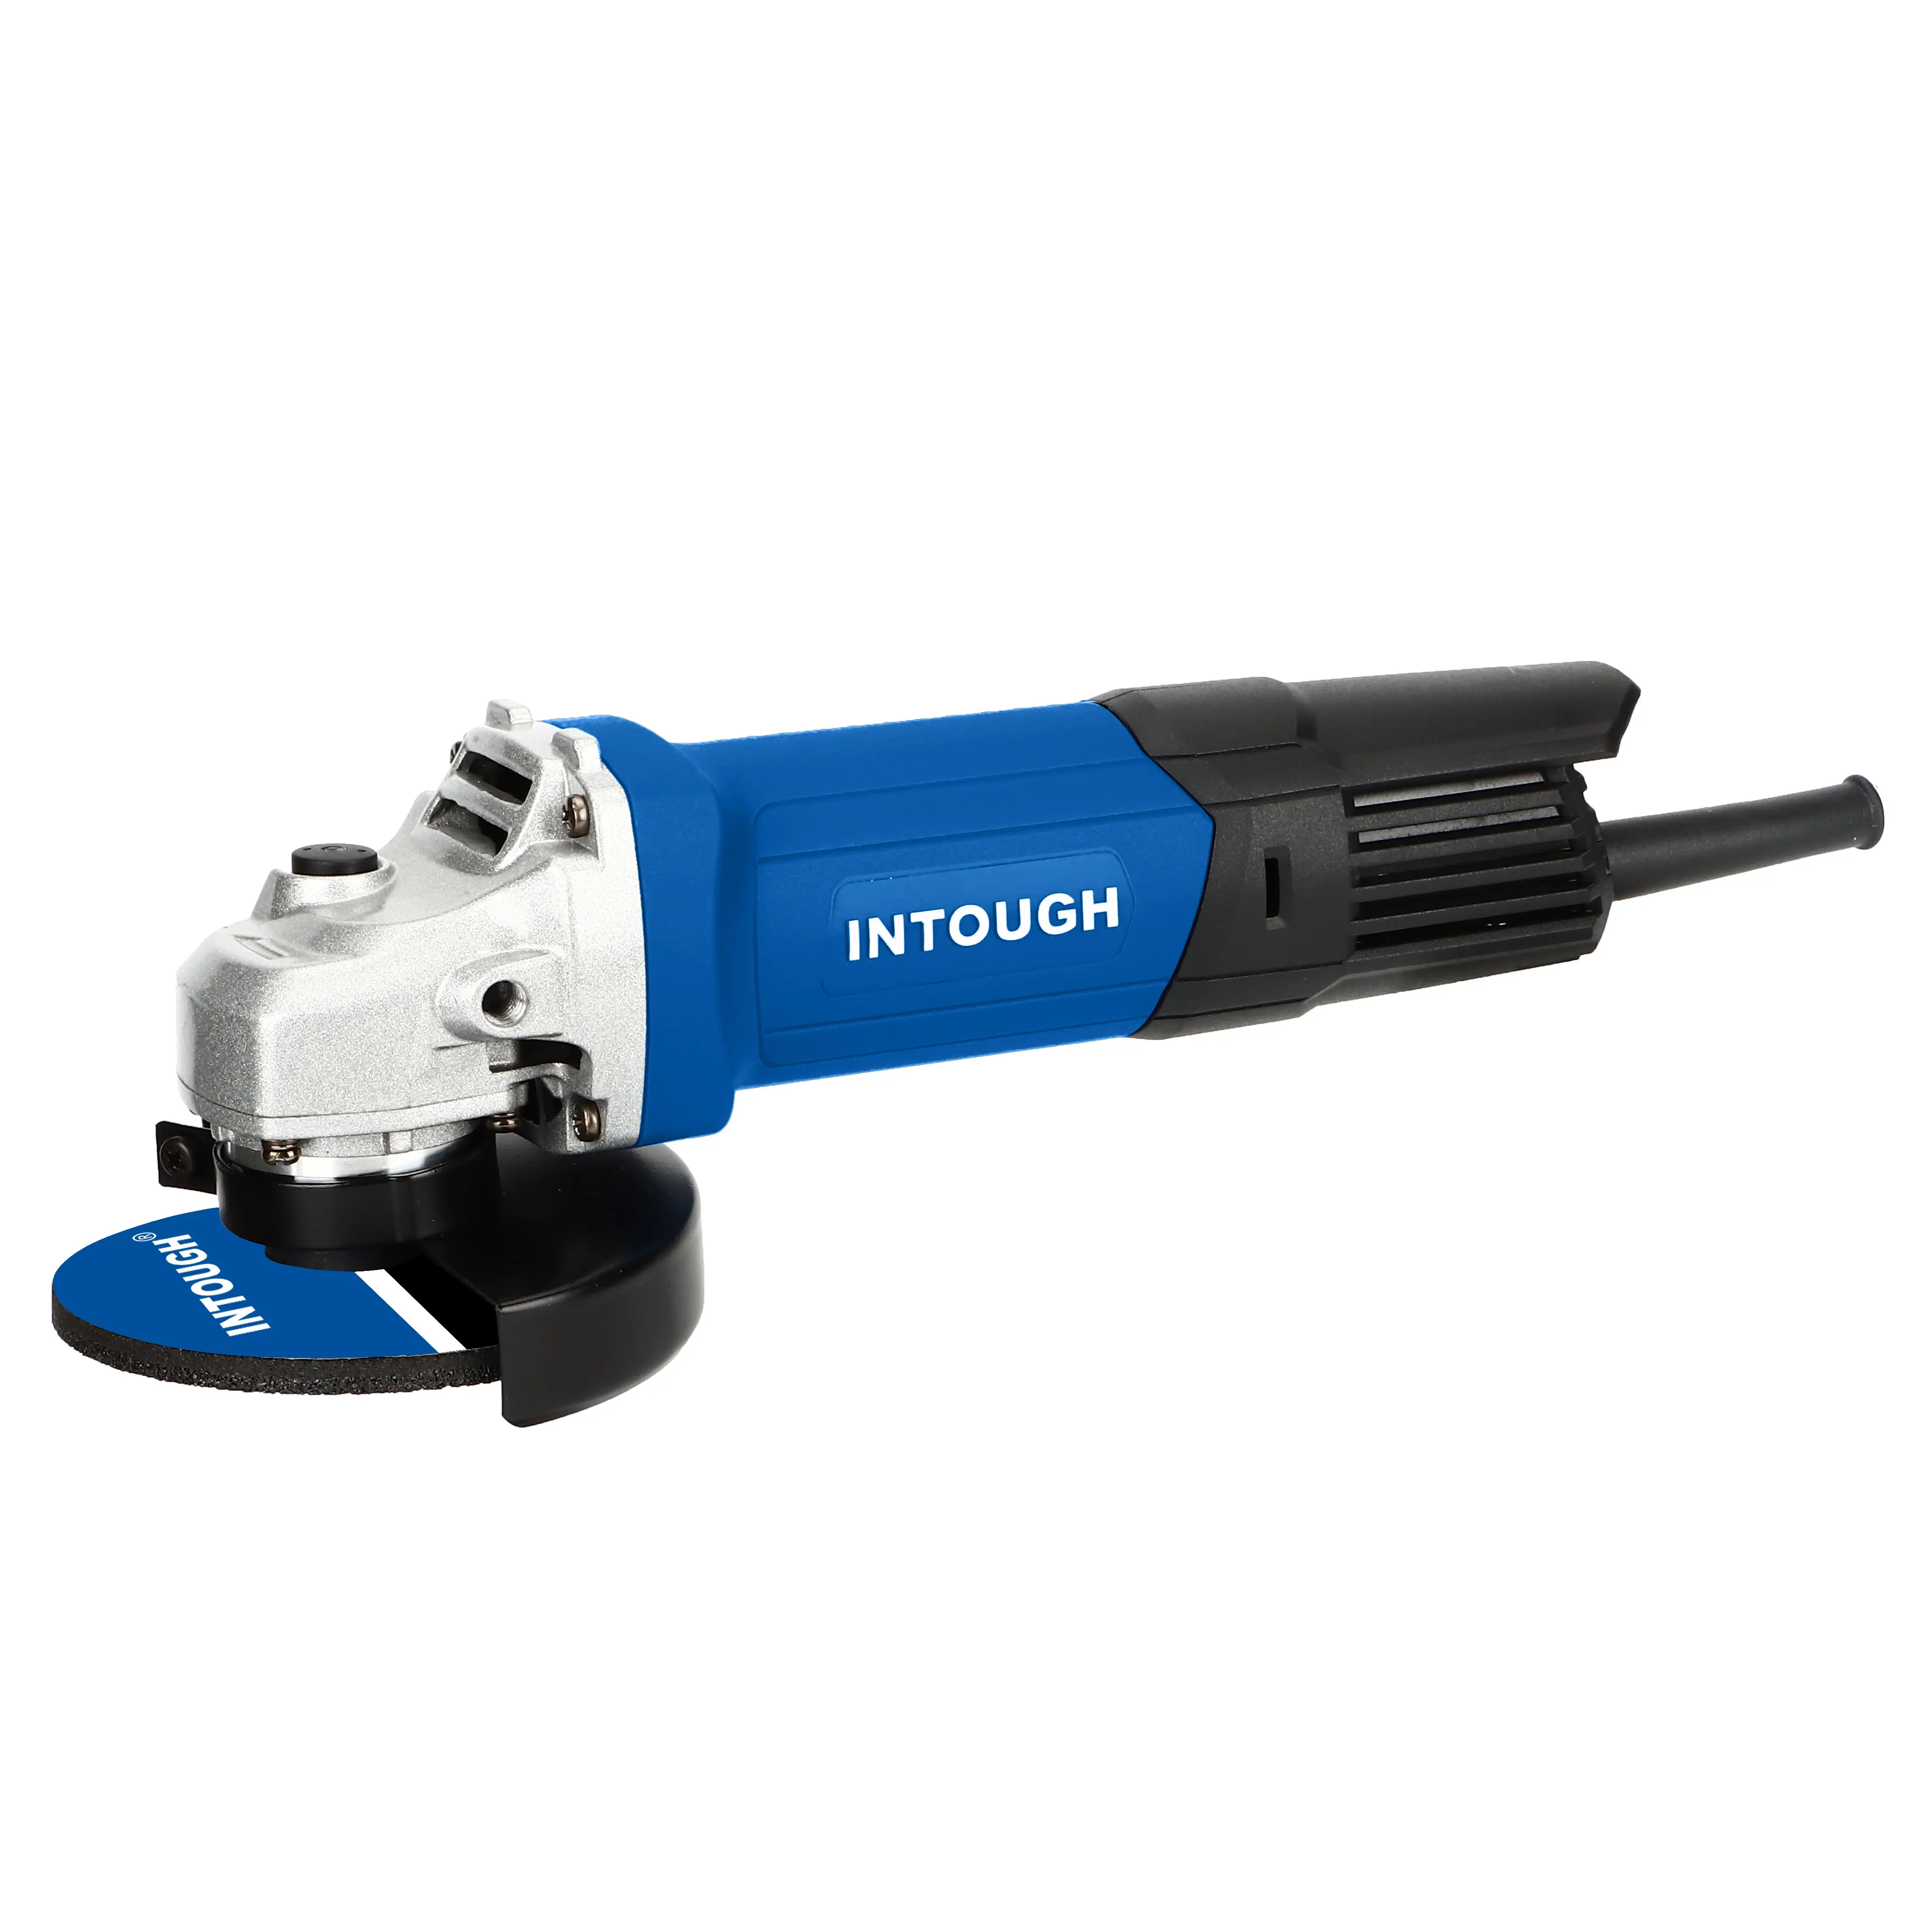 INTOUGH Hot Sale High Quality Mini Portable M14 115mm 750W Electric Cutting Angle Grinder